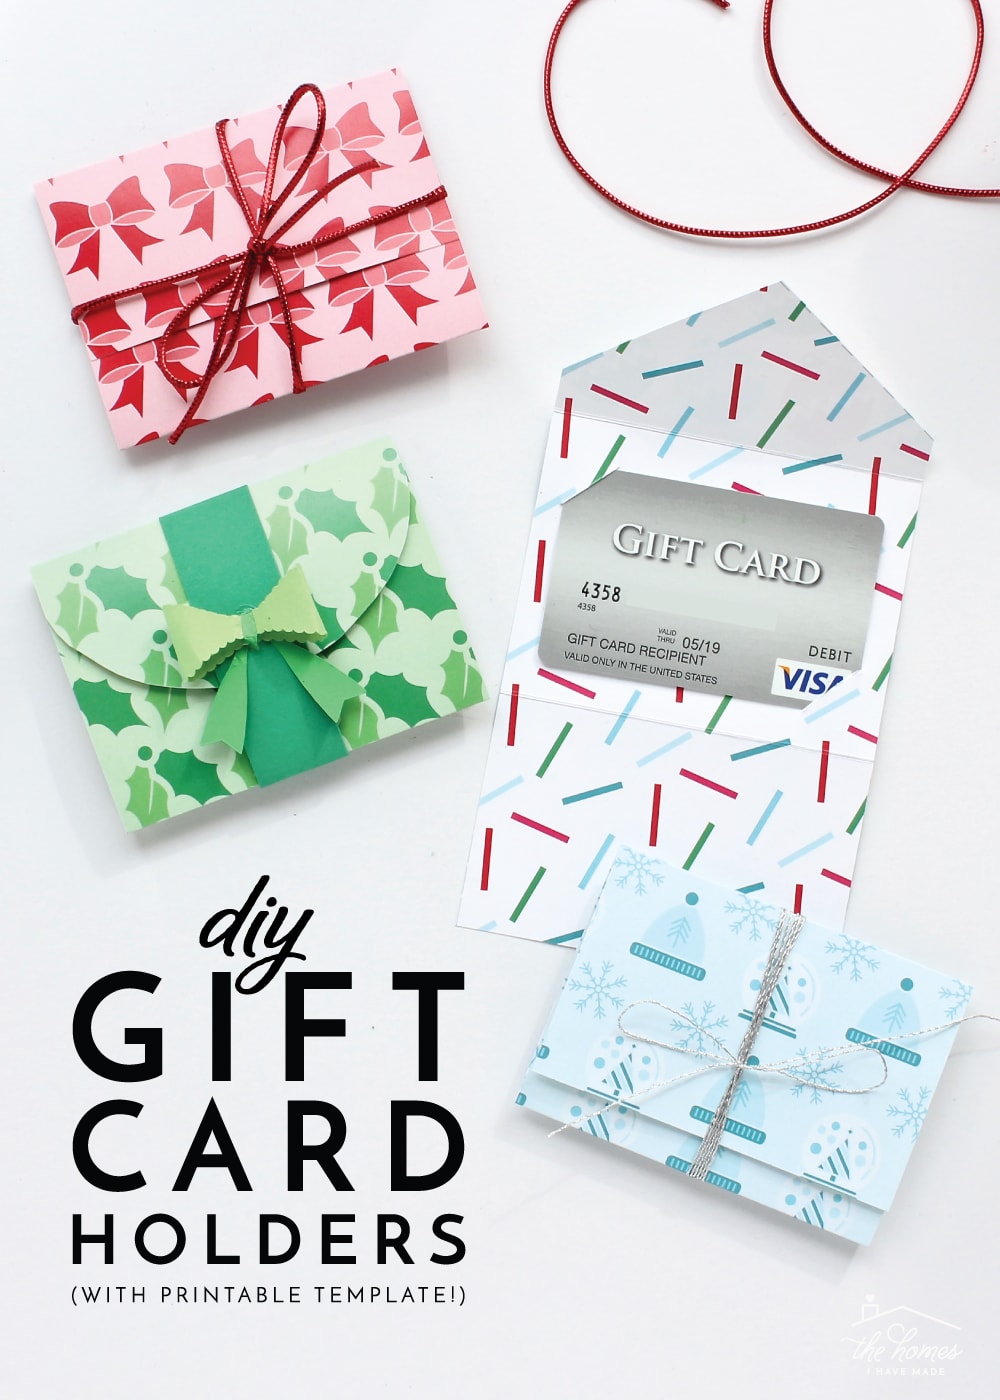 DIY Gift Card Holders with Printable Template The Homes I Have Made